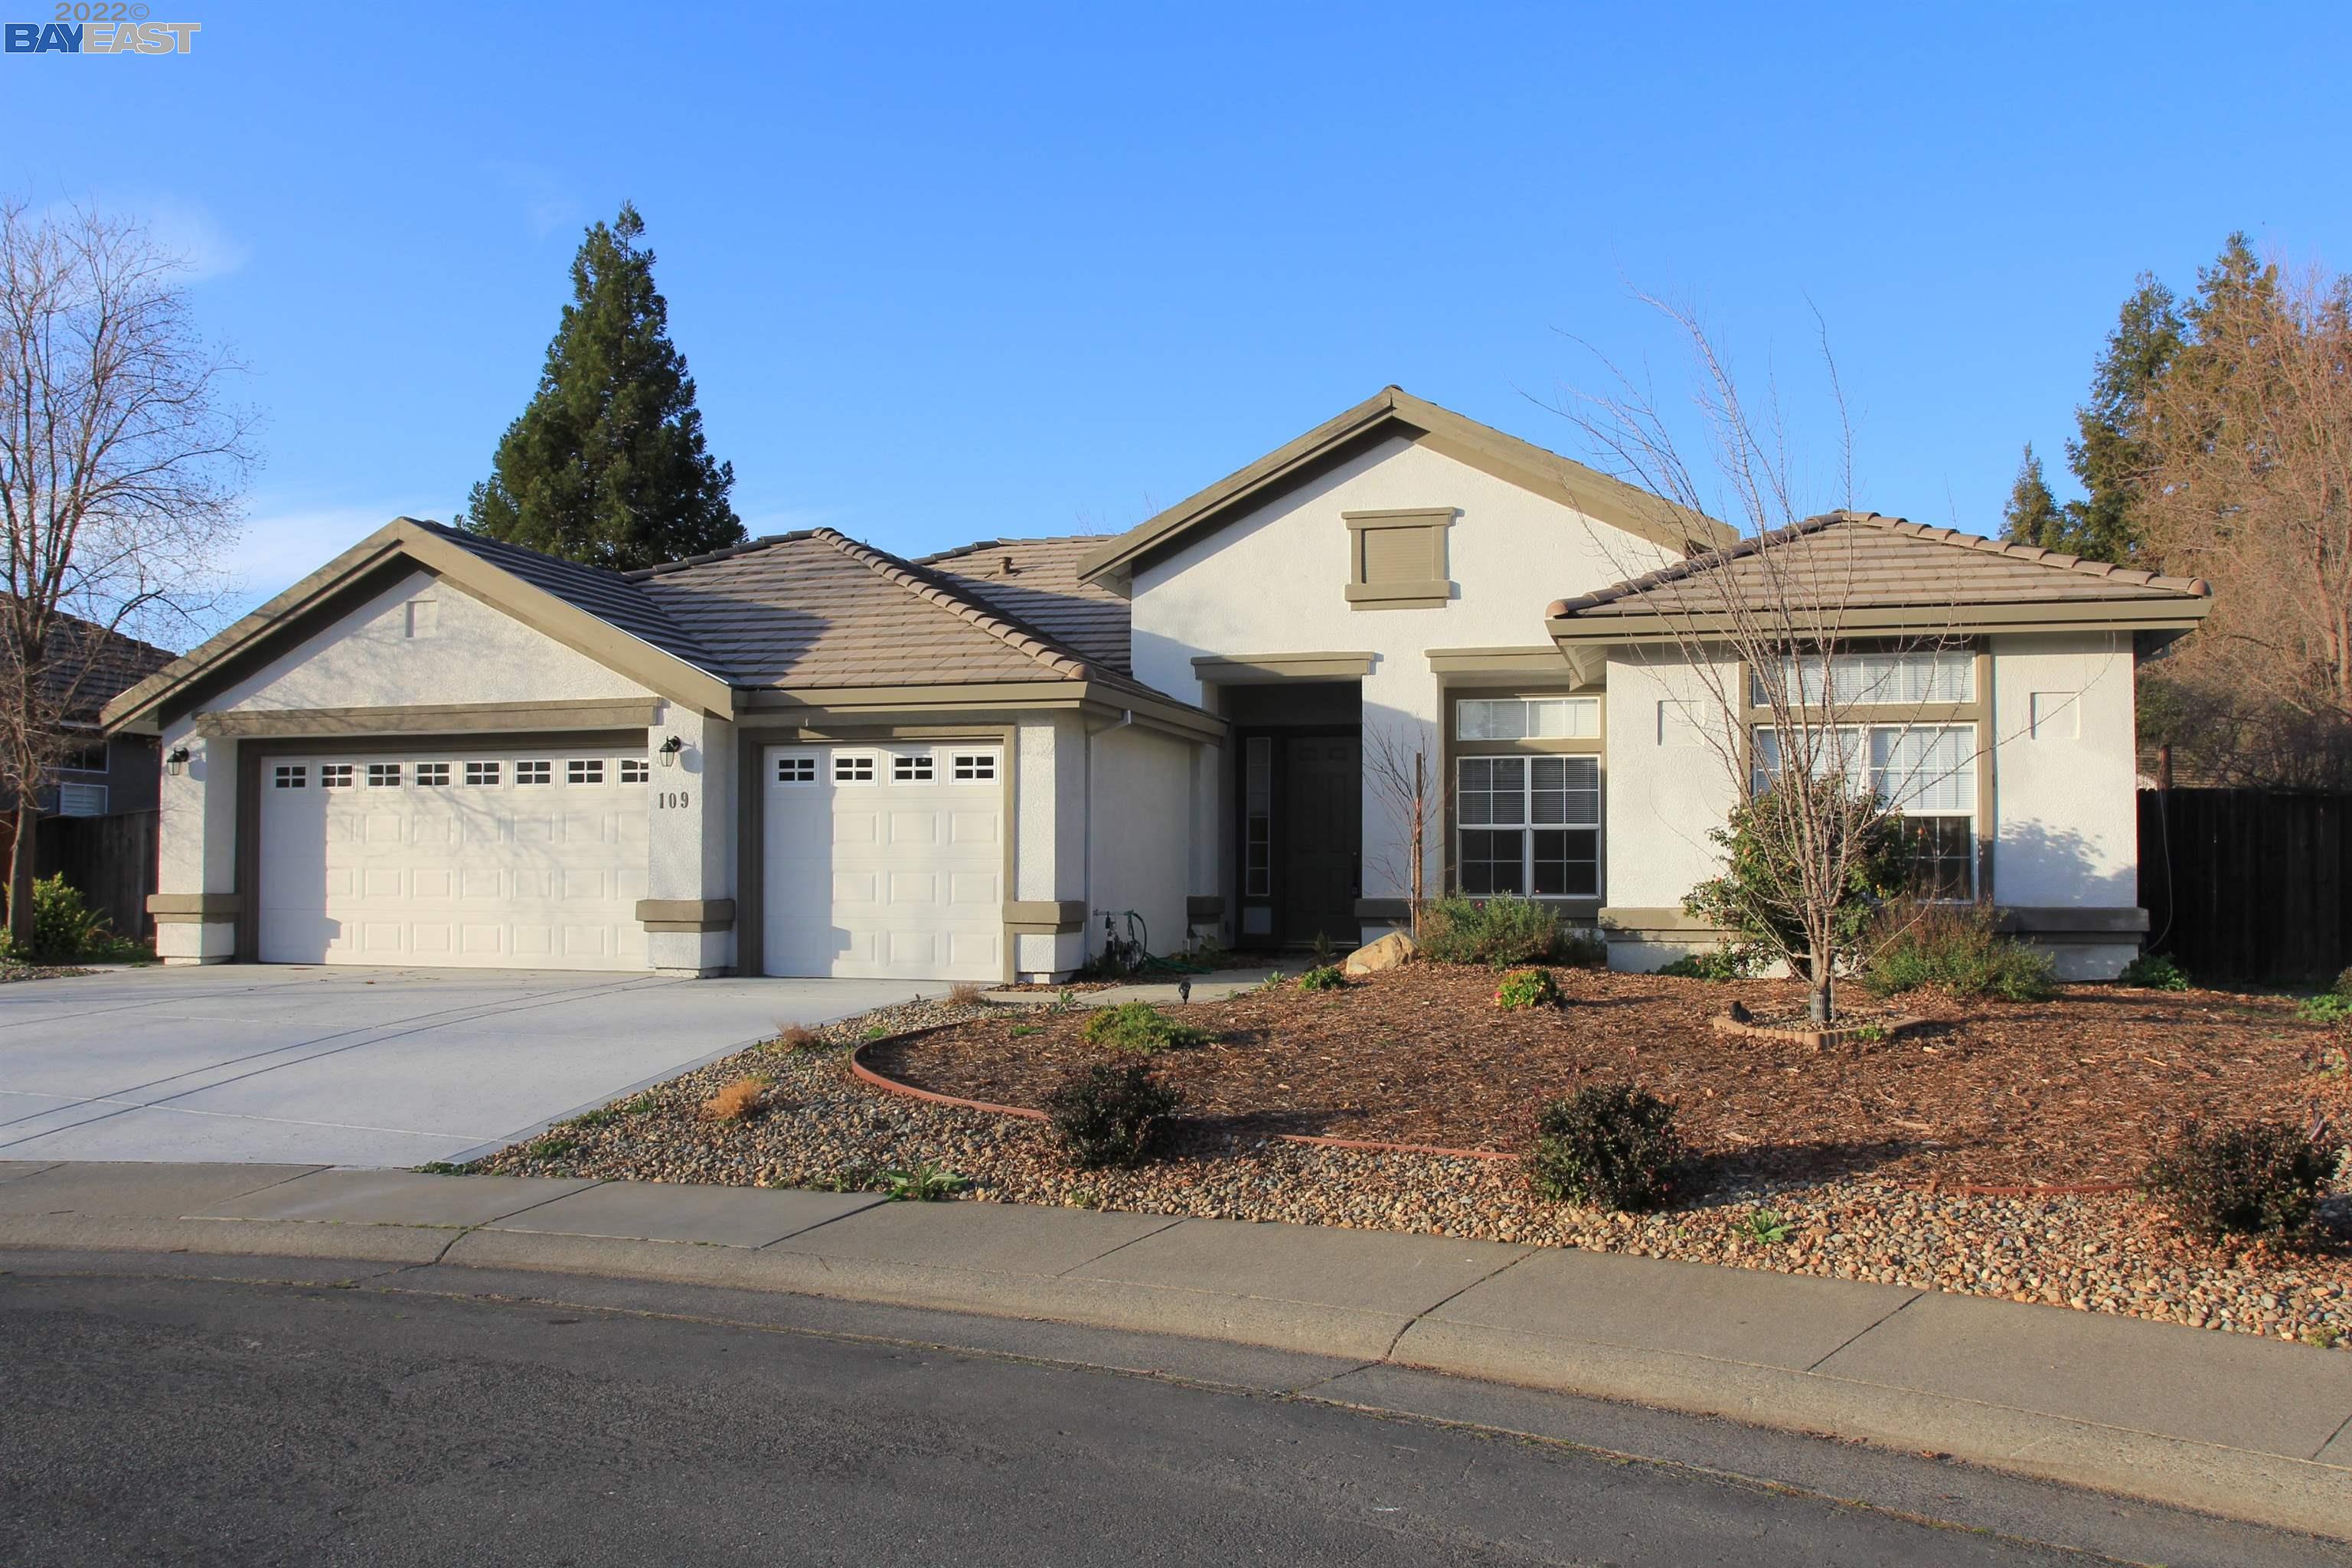 Photo of 109 Turnberry Ct in Roseville, CA